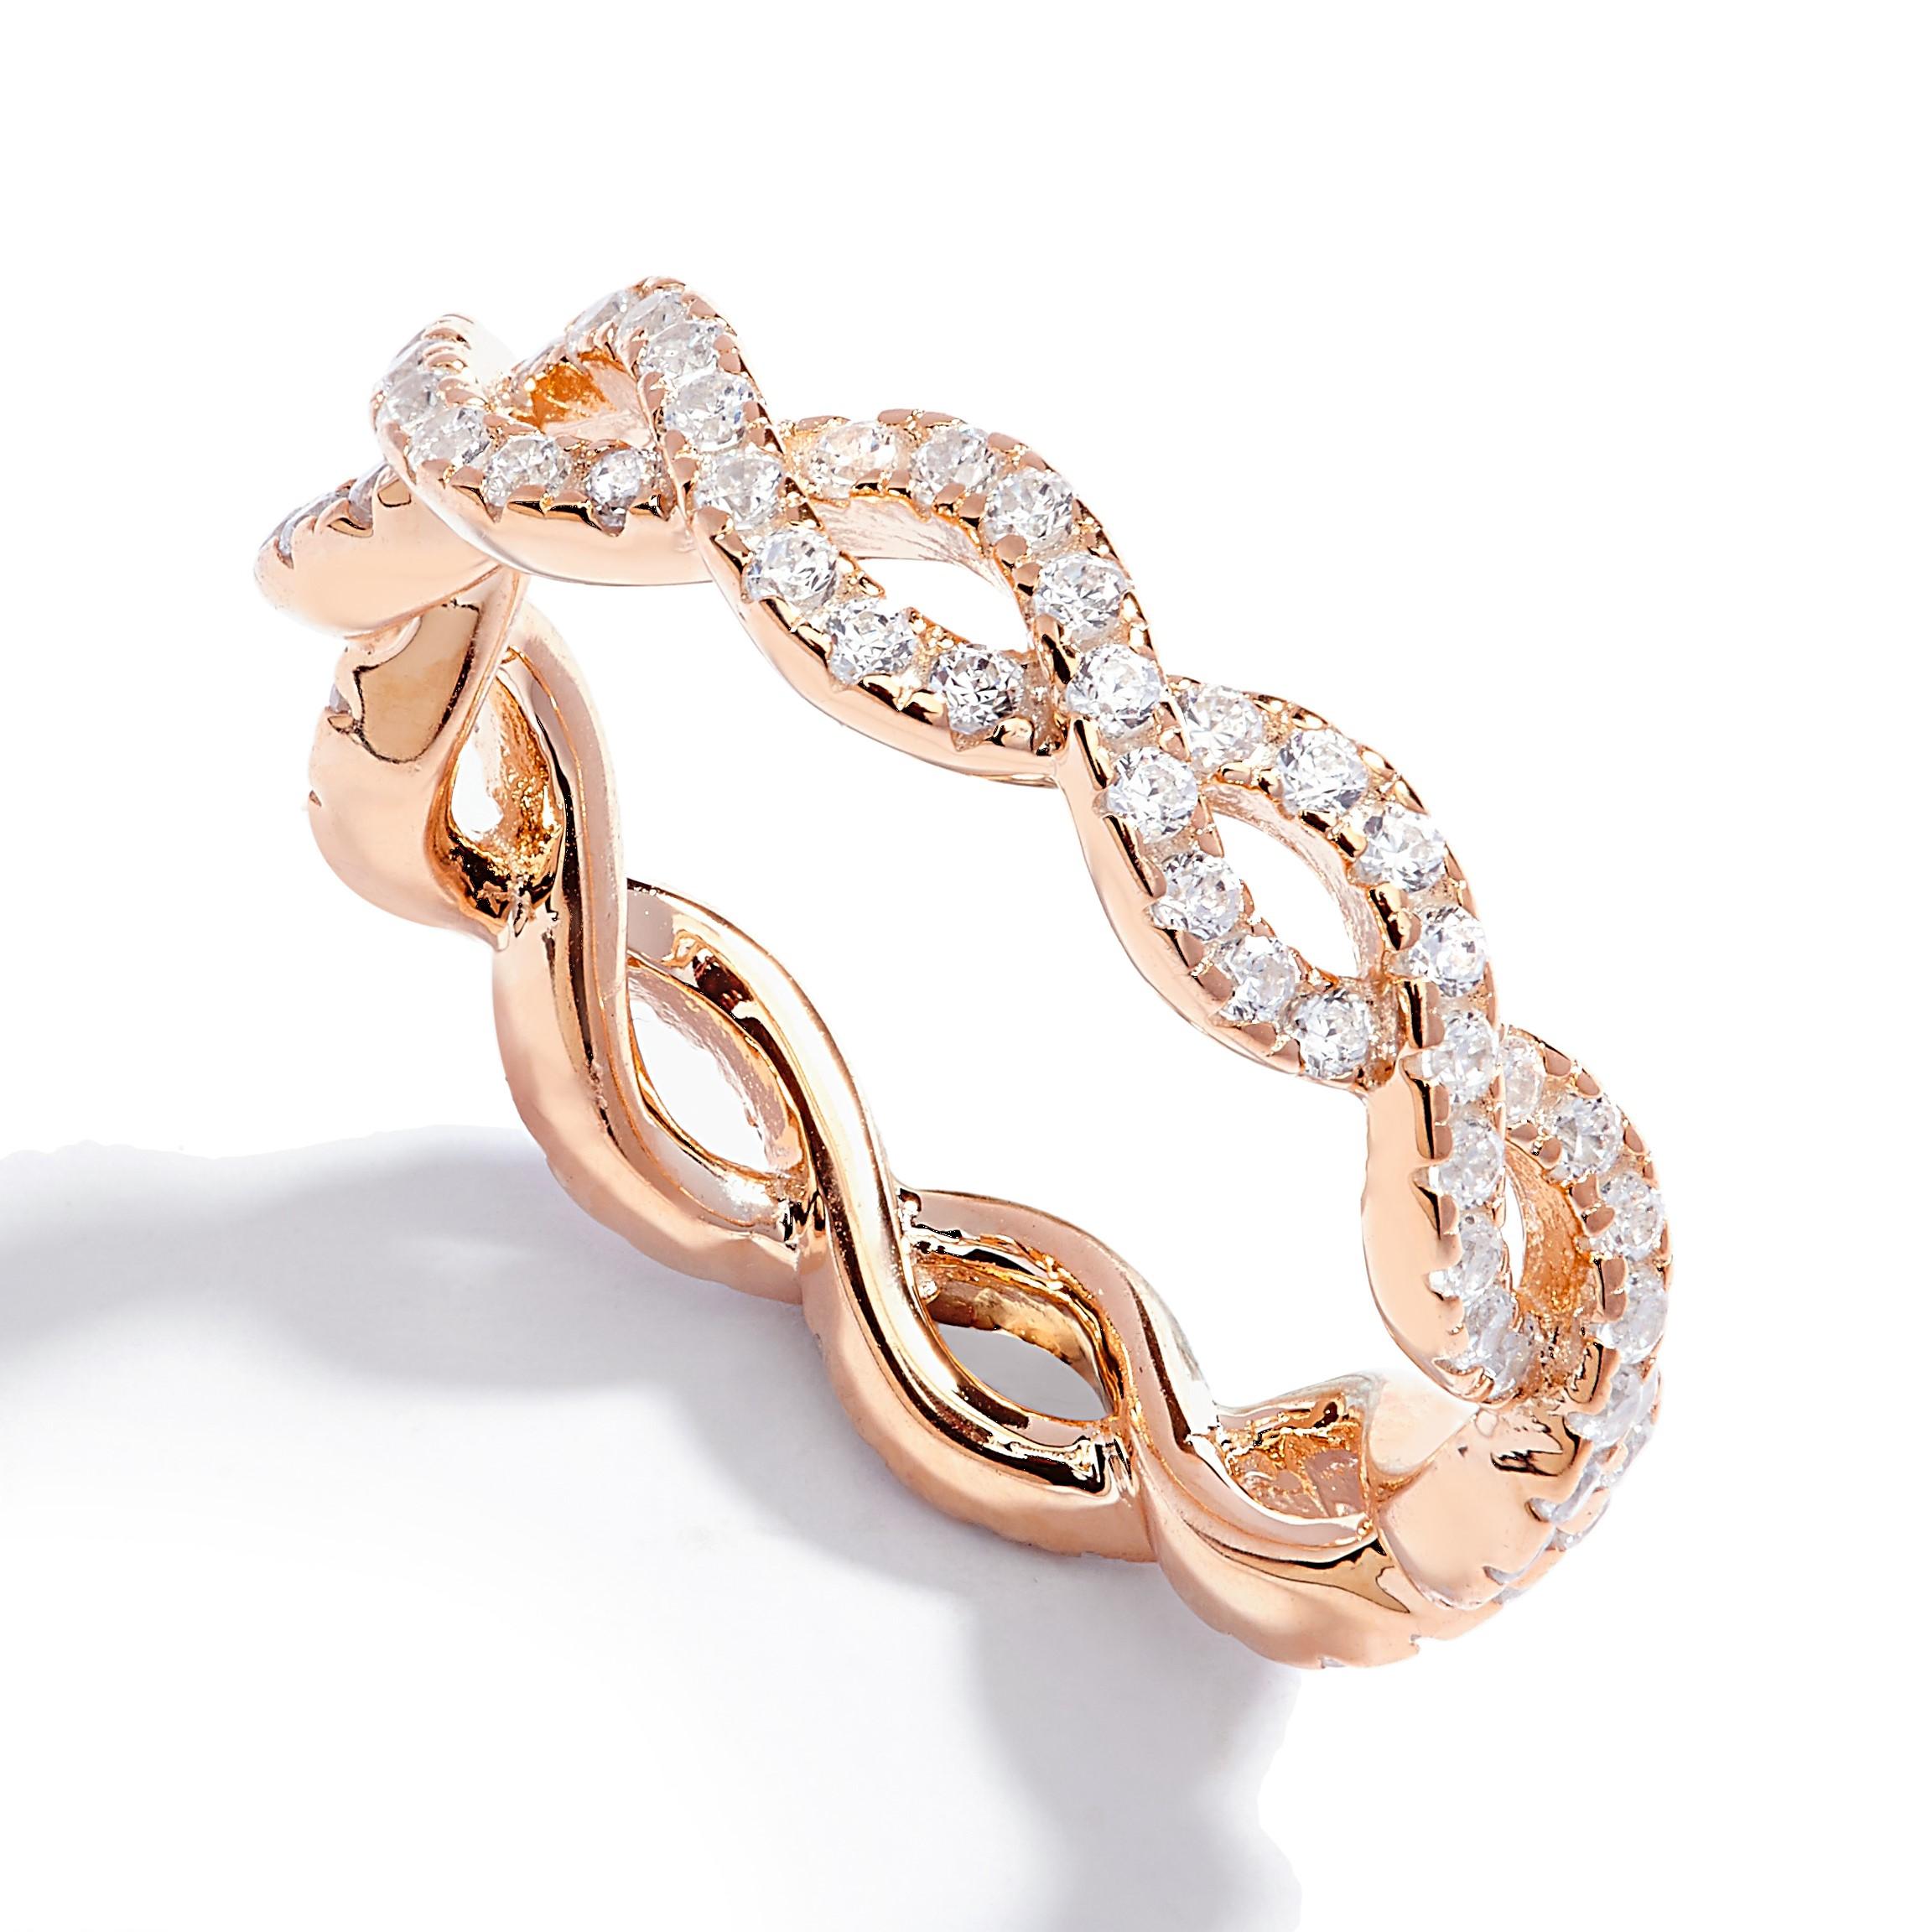 A classic look with a contemporary twist, this alluring full eternity twist ring effortlessly captures the most elegant of designs. Wear on it's own or together on the same finger for an on-trend stacked look.

Featuring 1.71ct of round brilliant